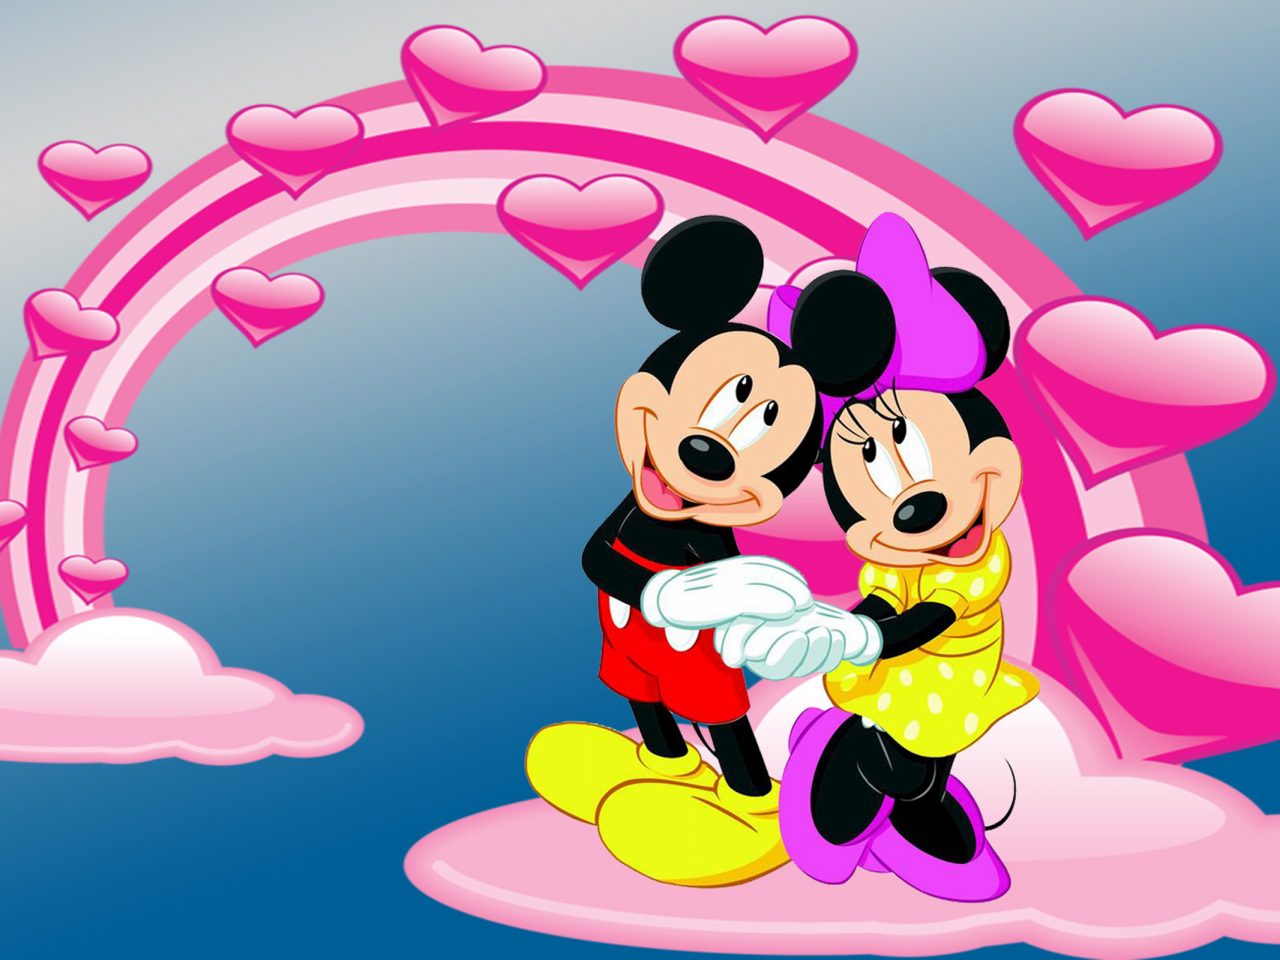 mickey and minnie mouse wallpapers free,cartoon,animated cartoon,love,heart,illustration